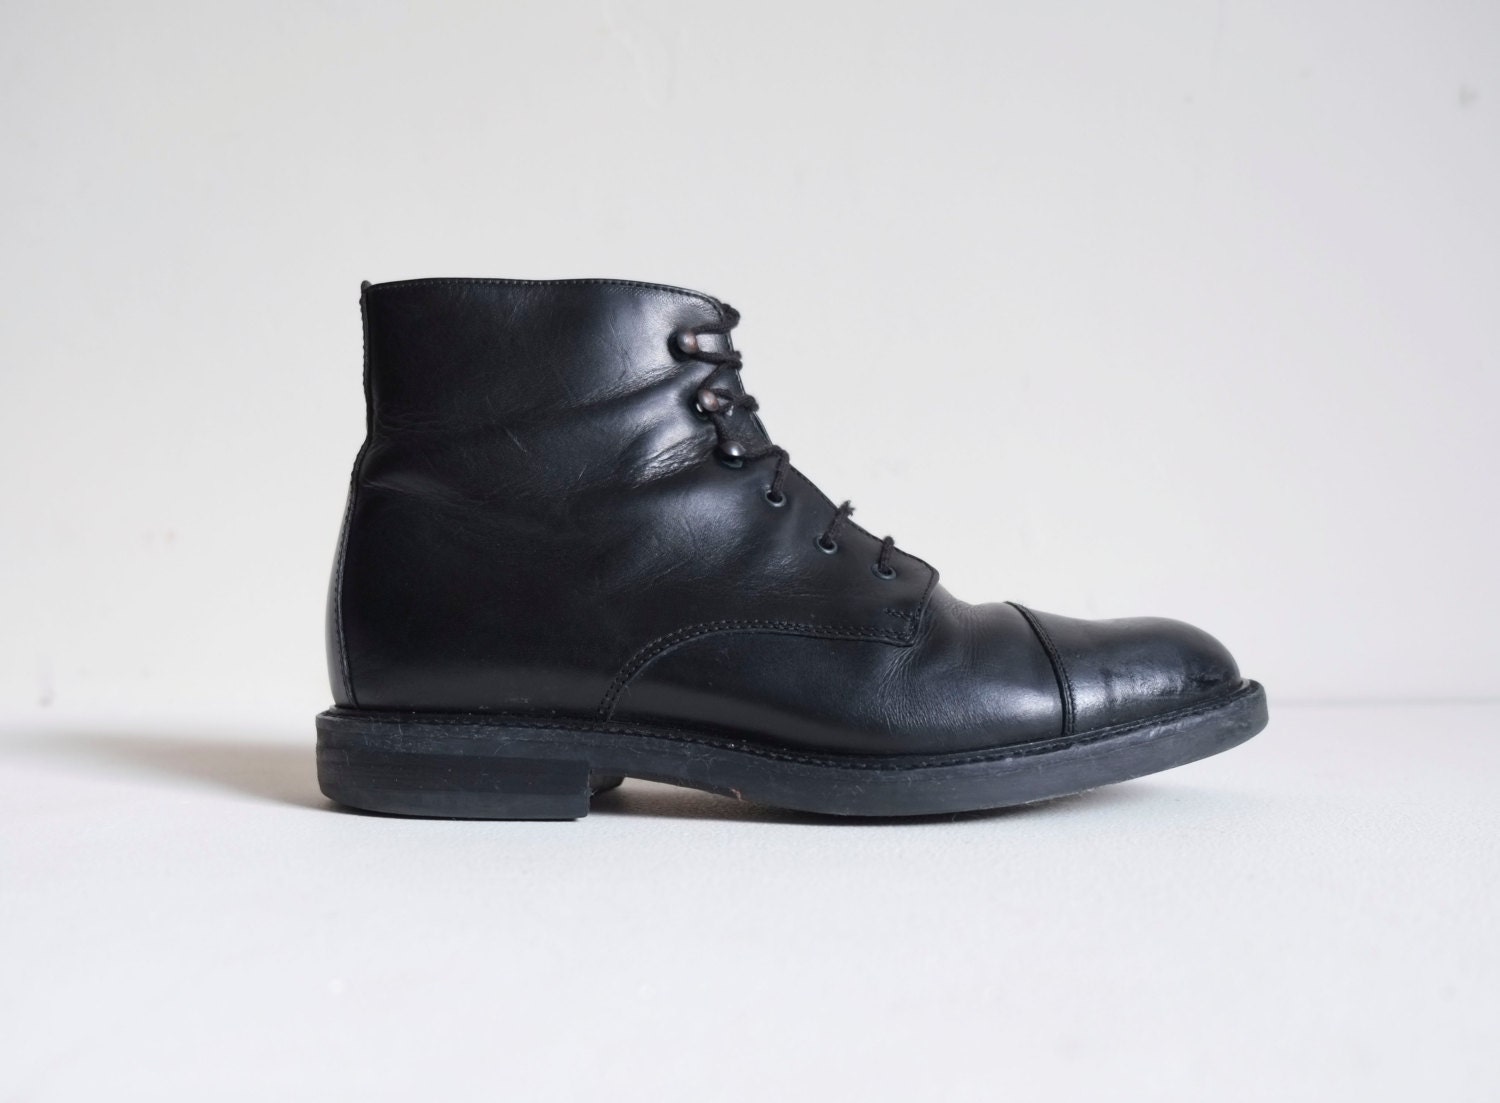 Vintage Italian Black Leather Men’s Lace Up Victorian Work Ankle Boots ...